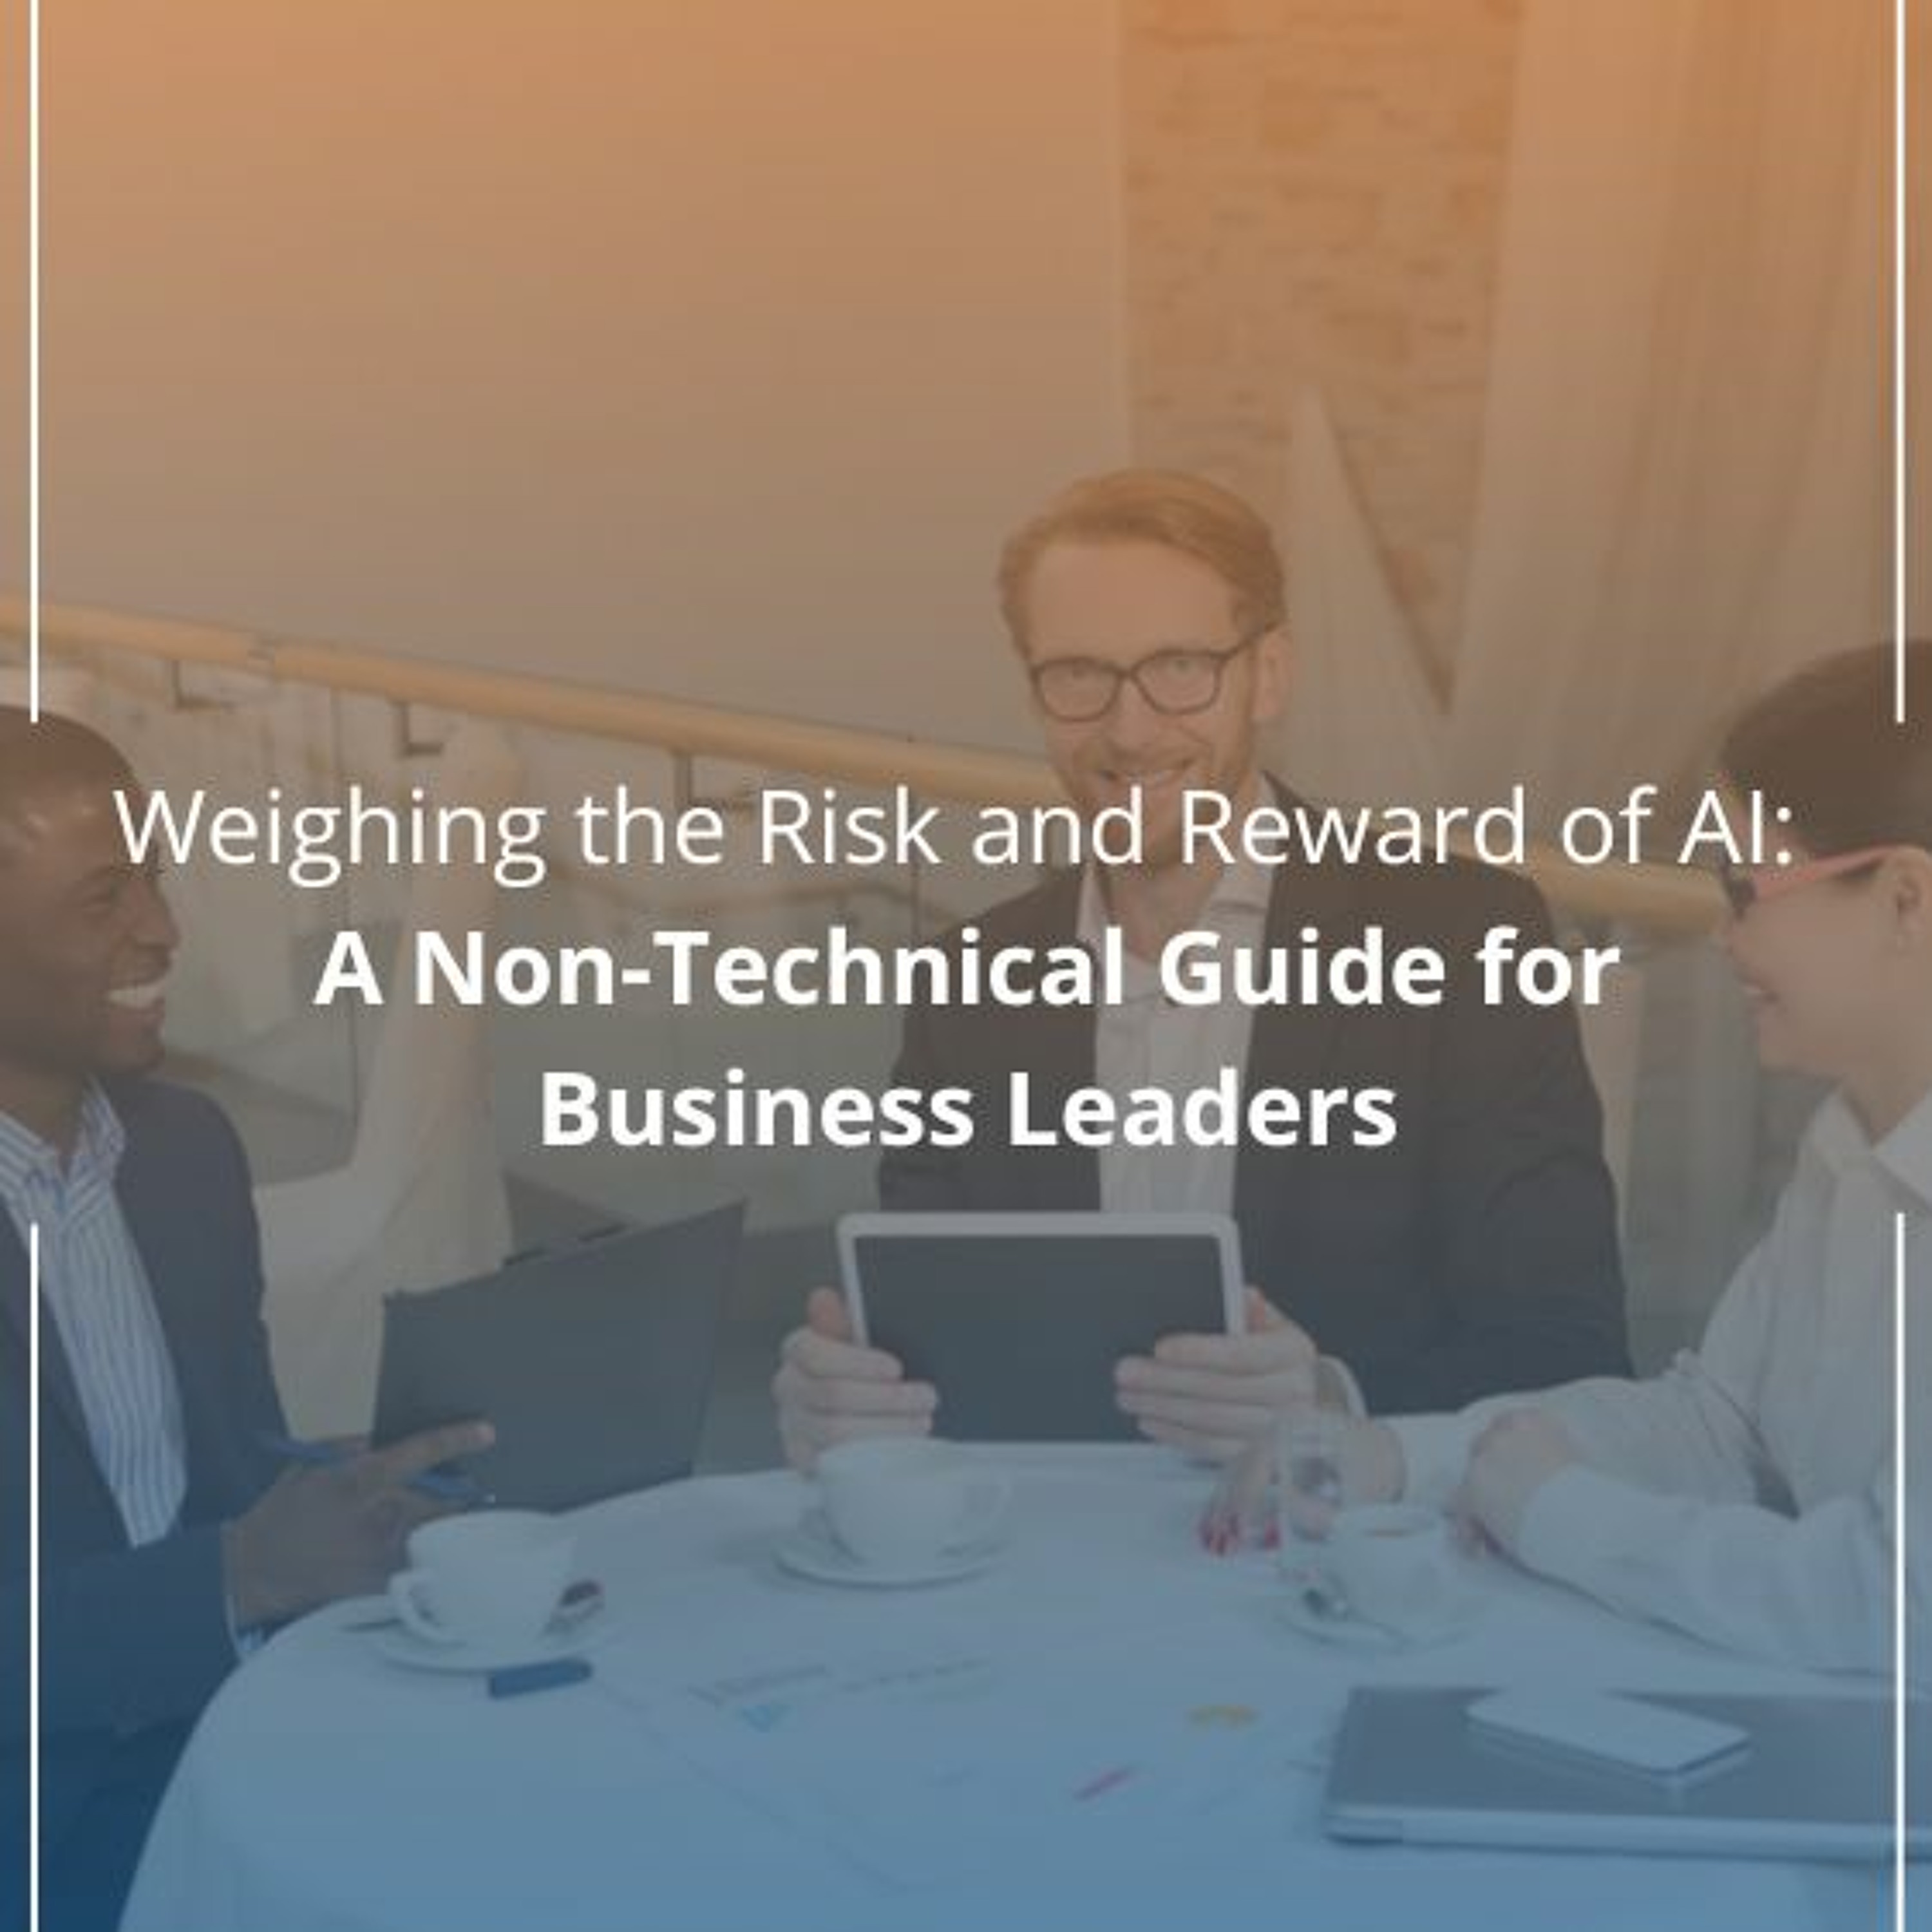 Weighing the Risk and Reward of AI: A Non-Technical Guide for Business Leaders - Audio Blog